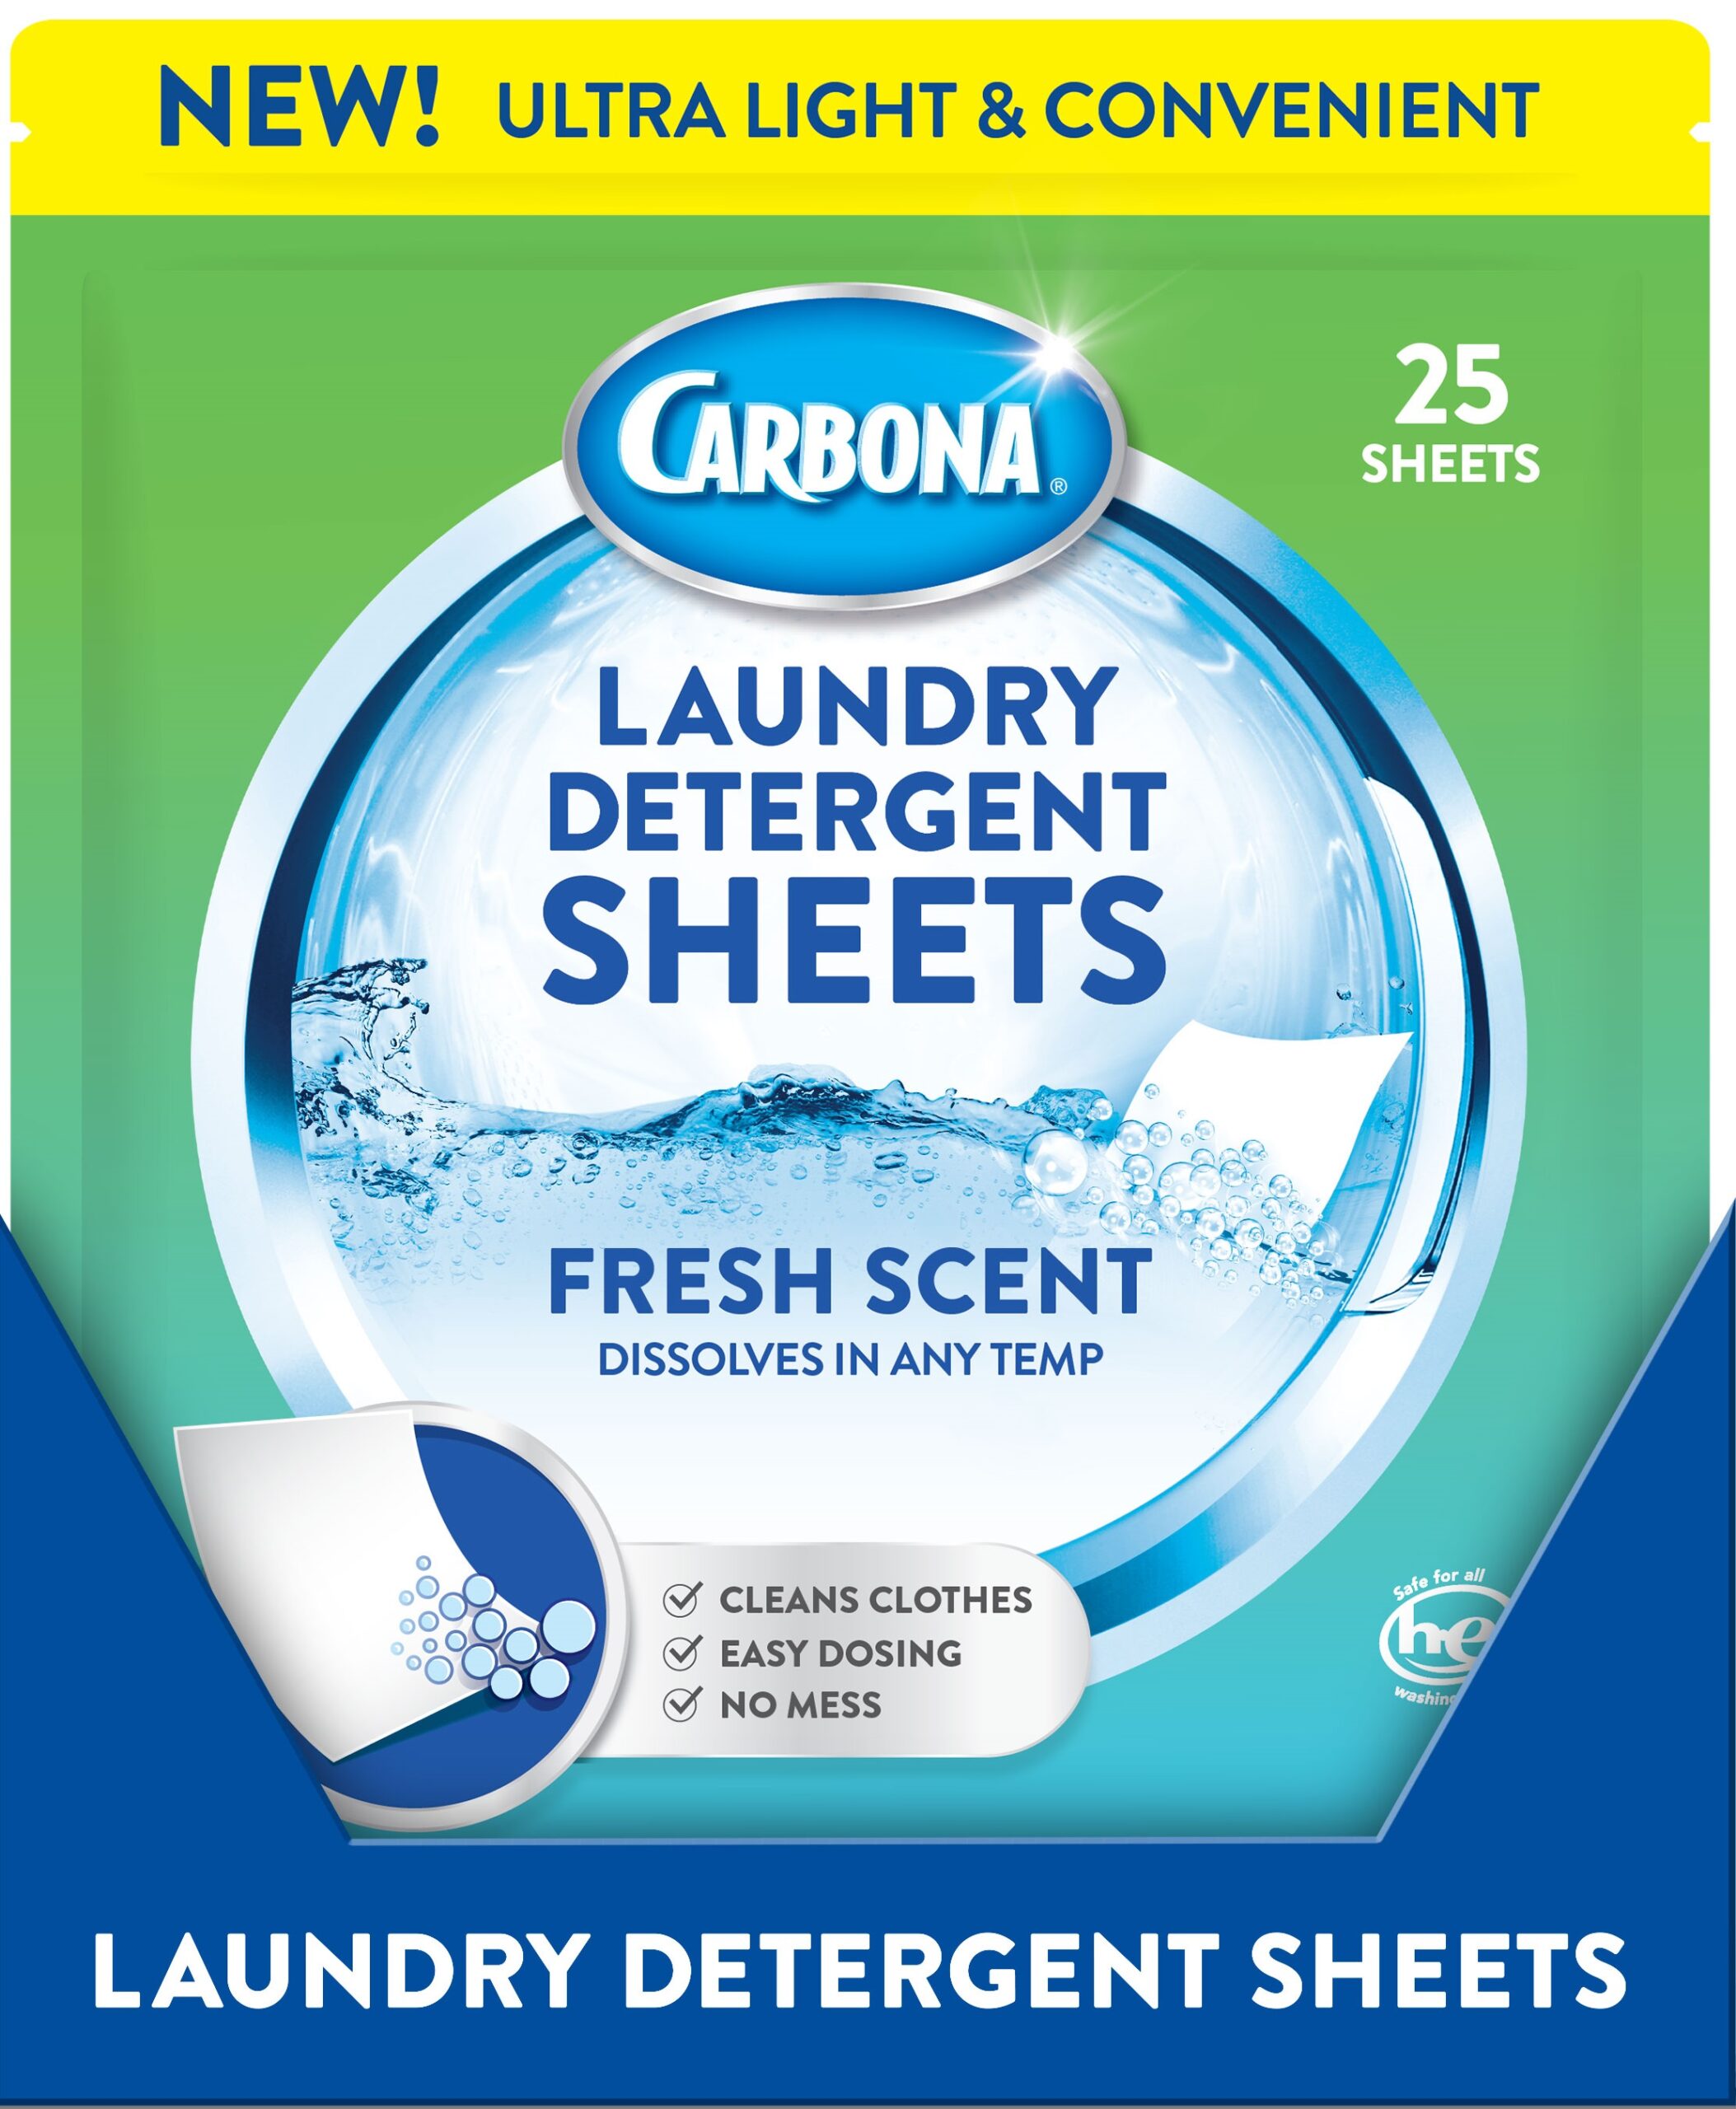 Carbona expands lineup with laundry detergent sheets